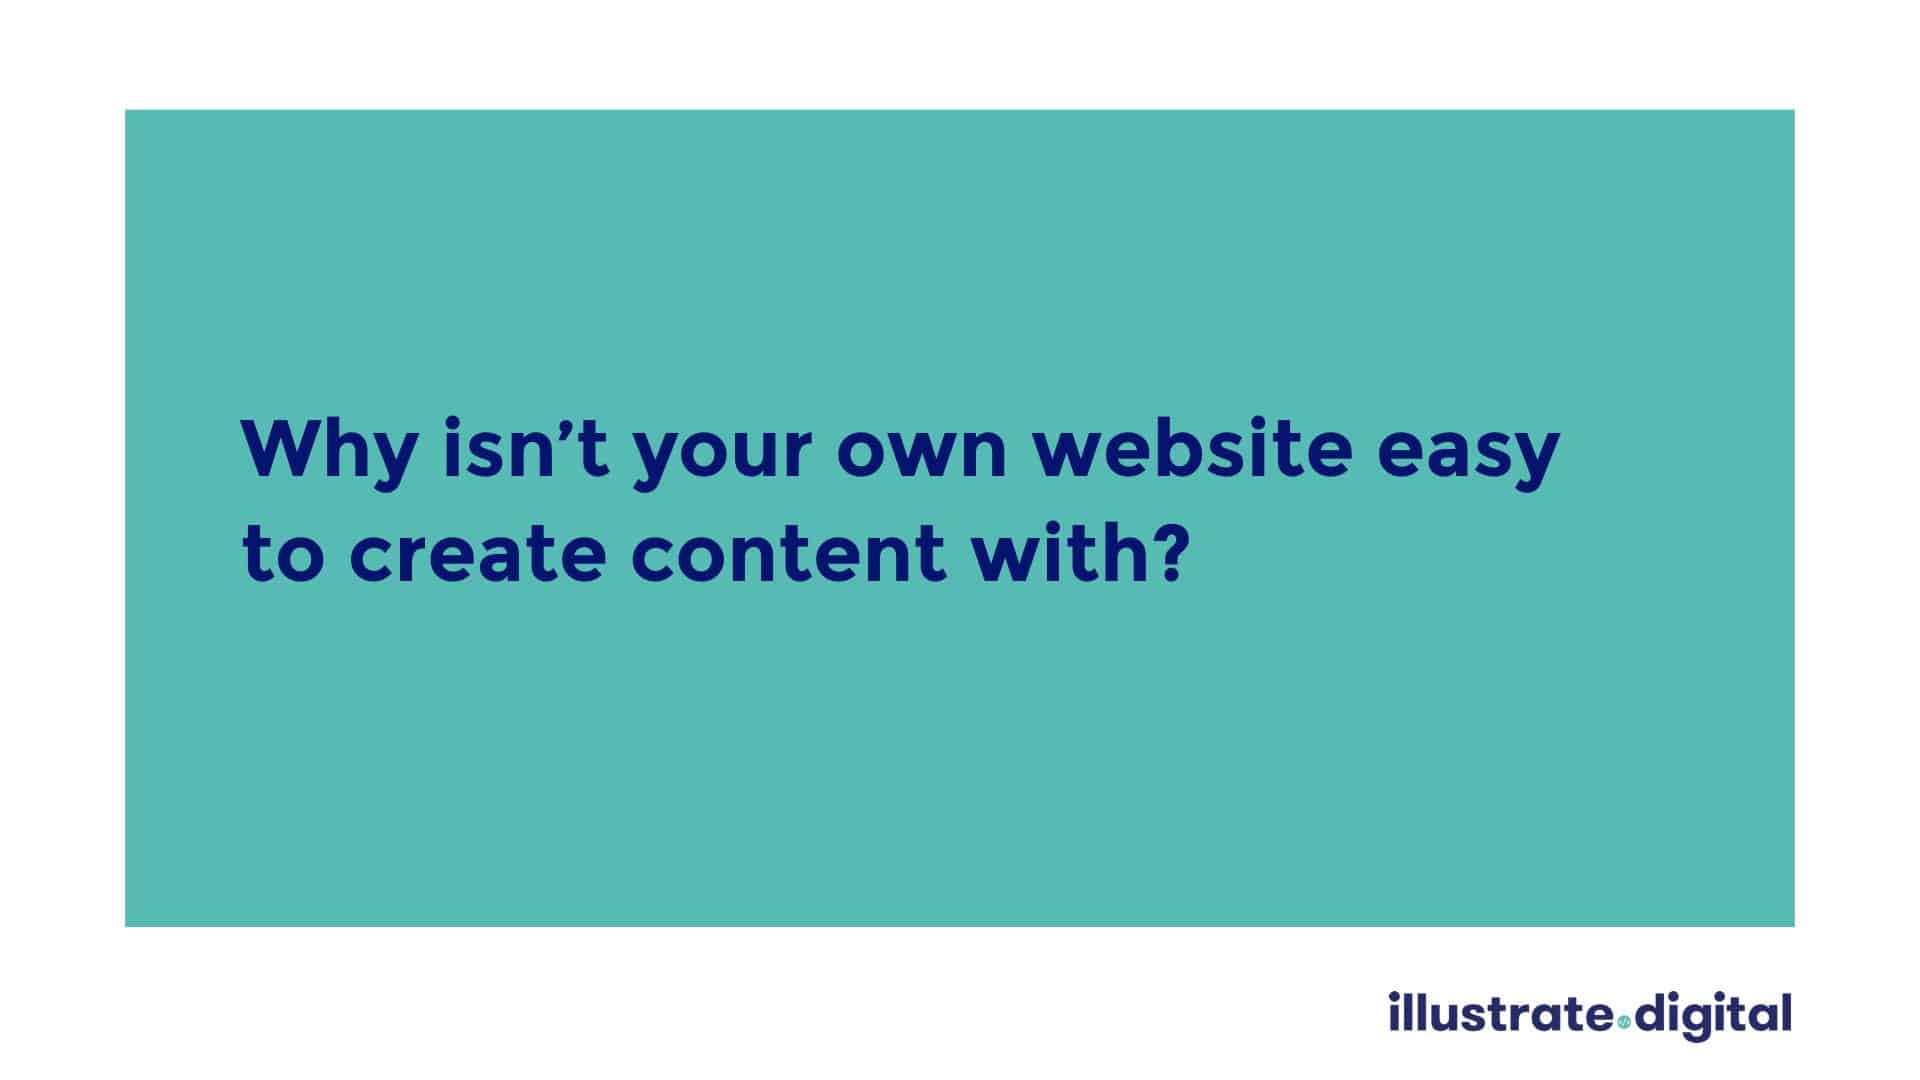 Your website should be easy to create content with